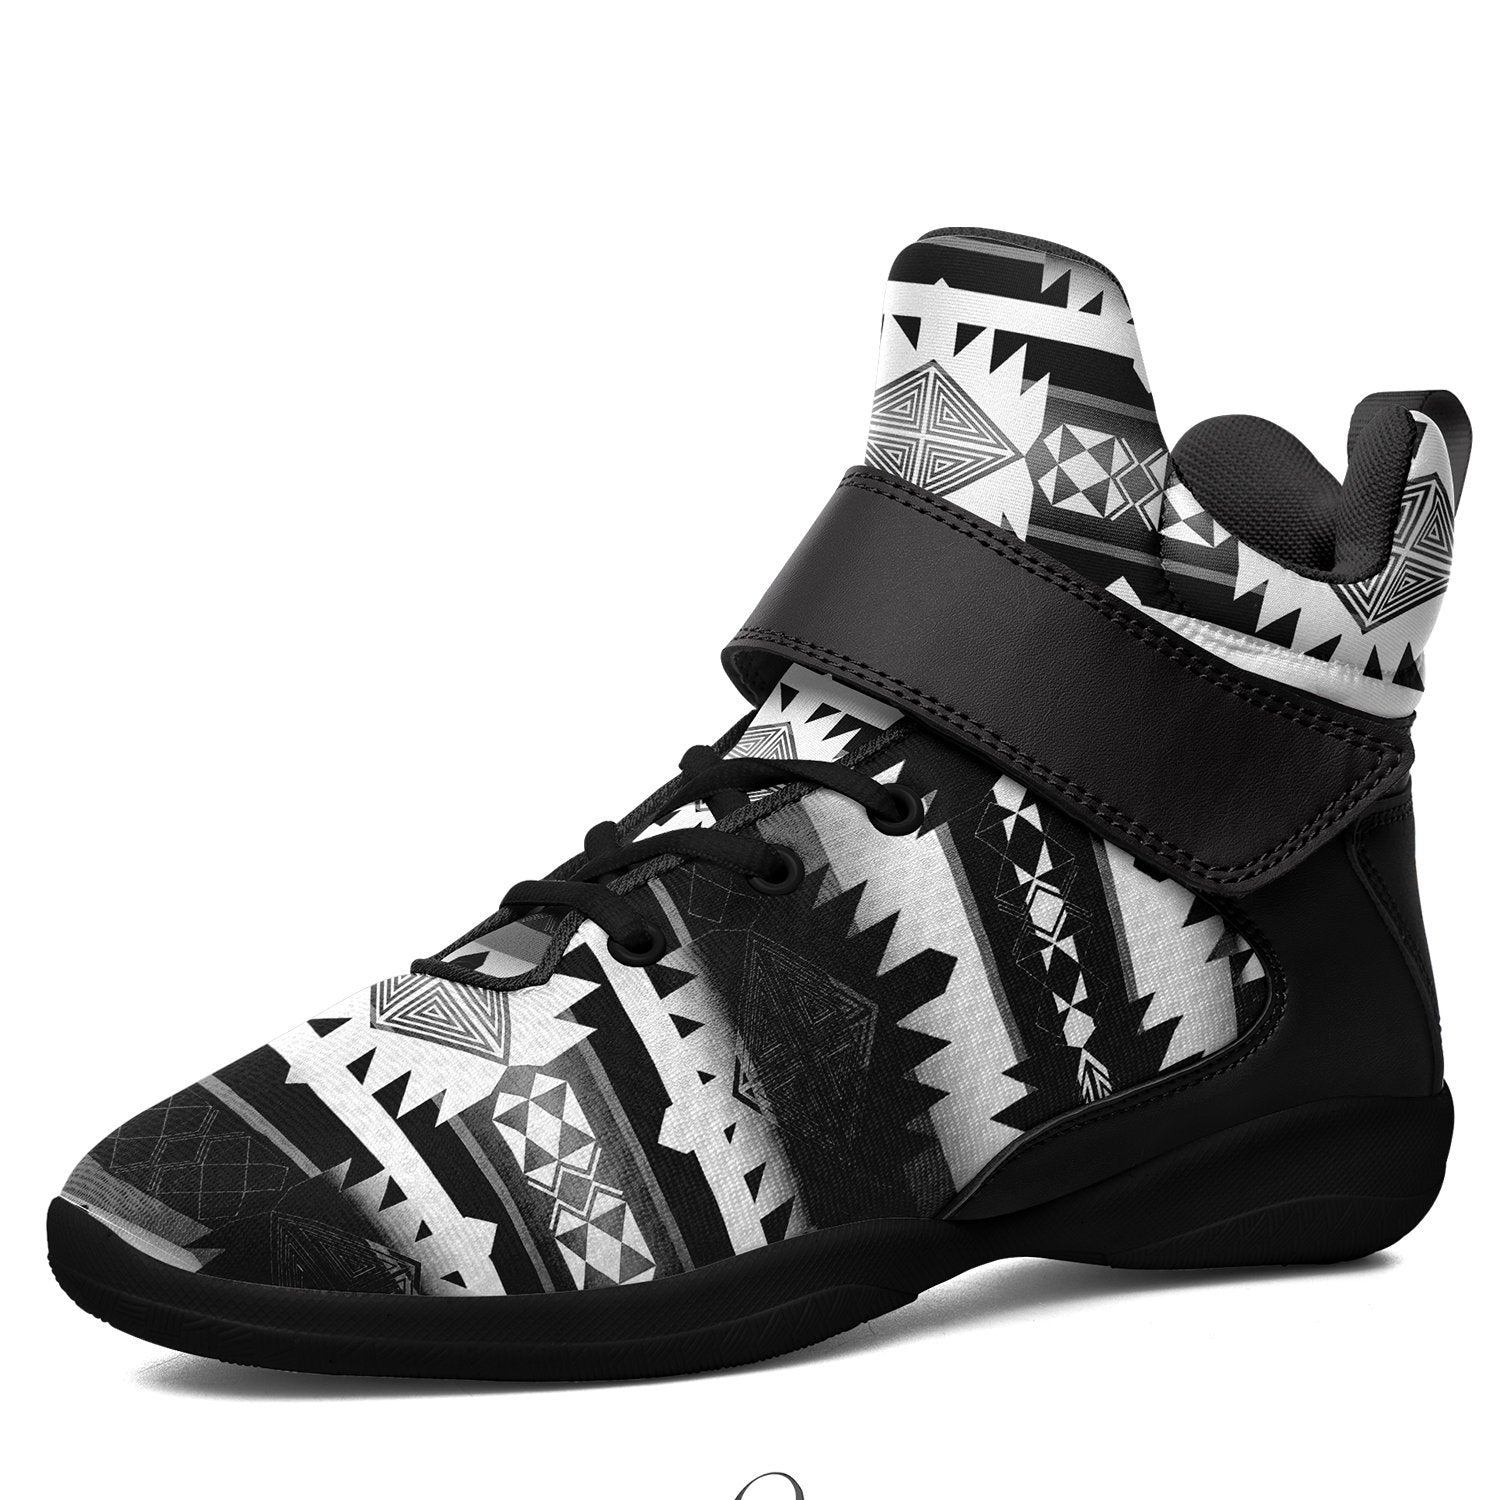 Okotoks Black and White Kid's Ipottaa Basketball / Sport High Top Shoes 49 Dzine US Child 12.5 / EUR 30 Black Sole with Black Strap 